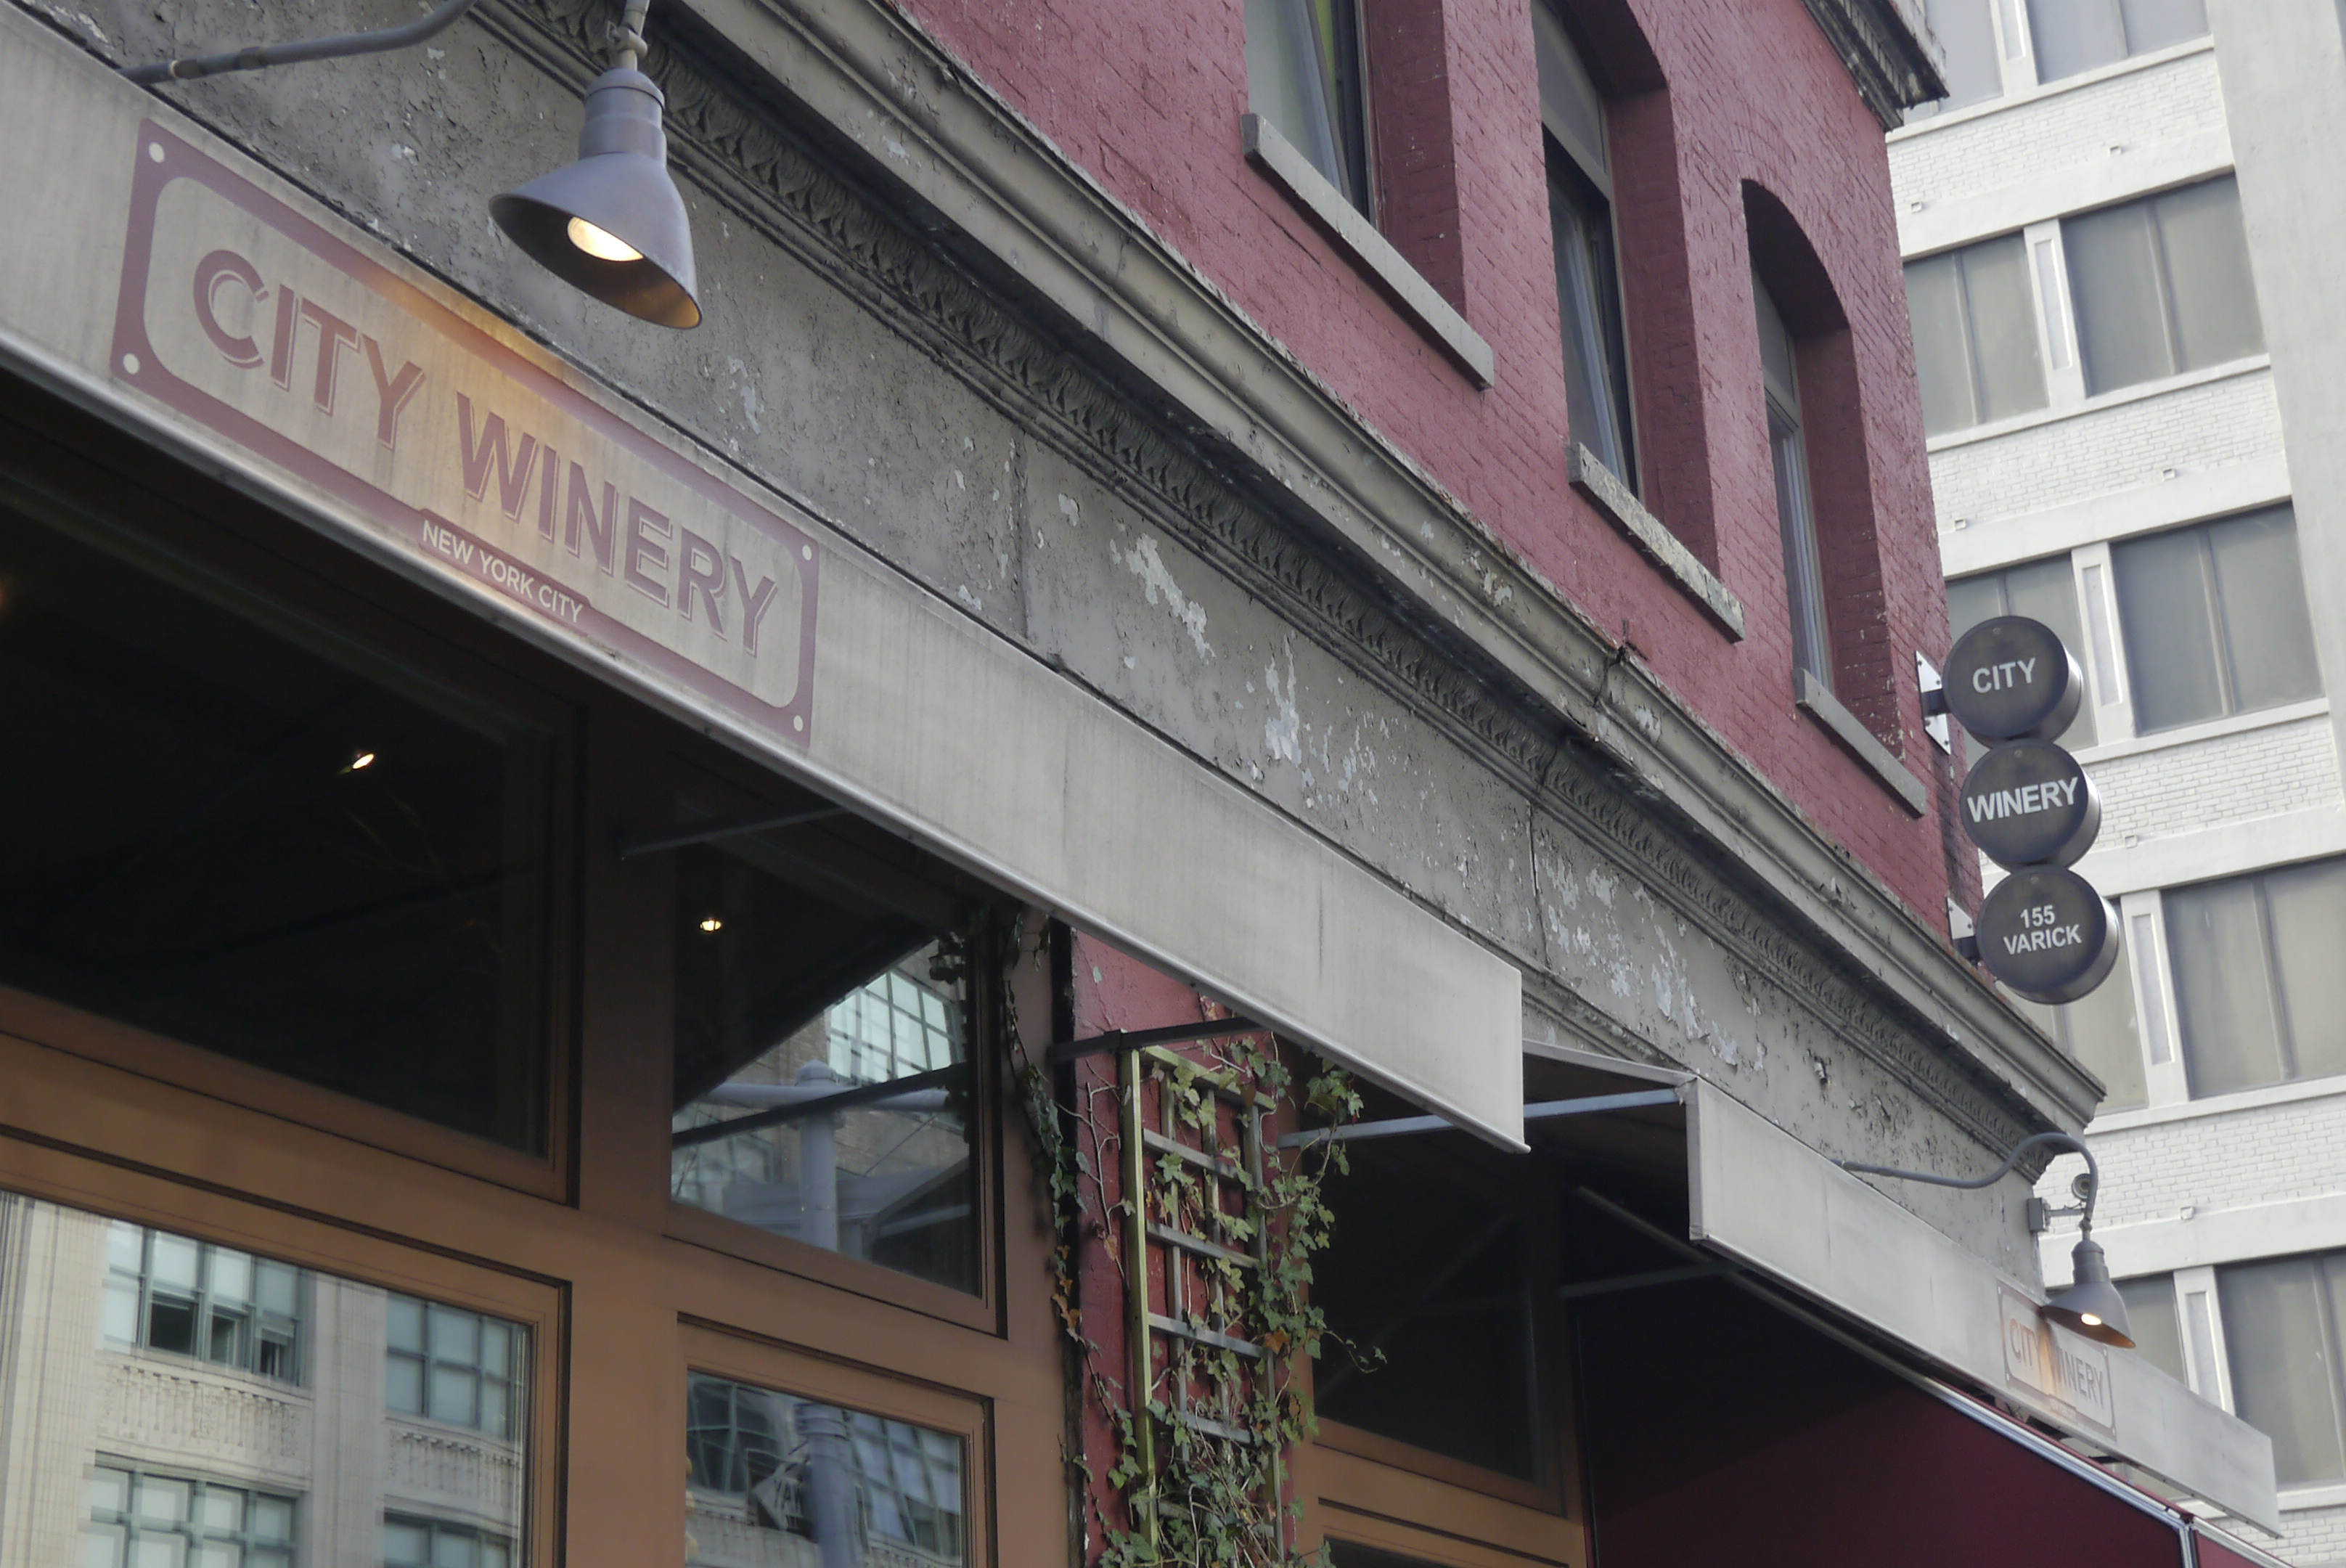 City Winery front